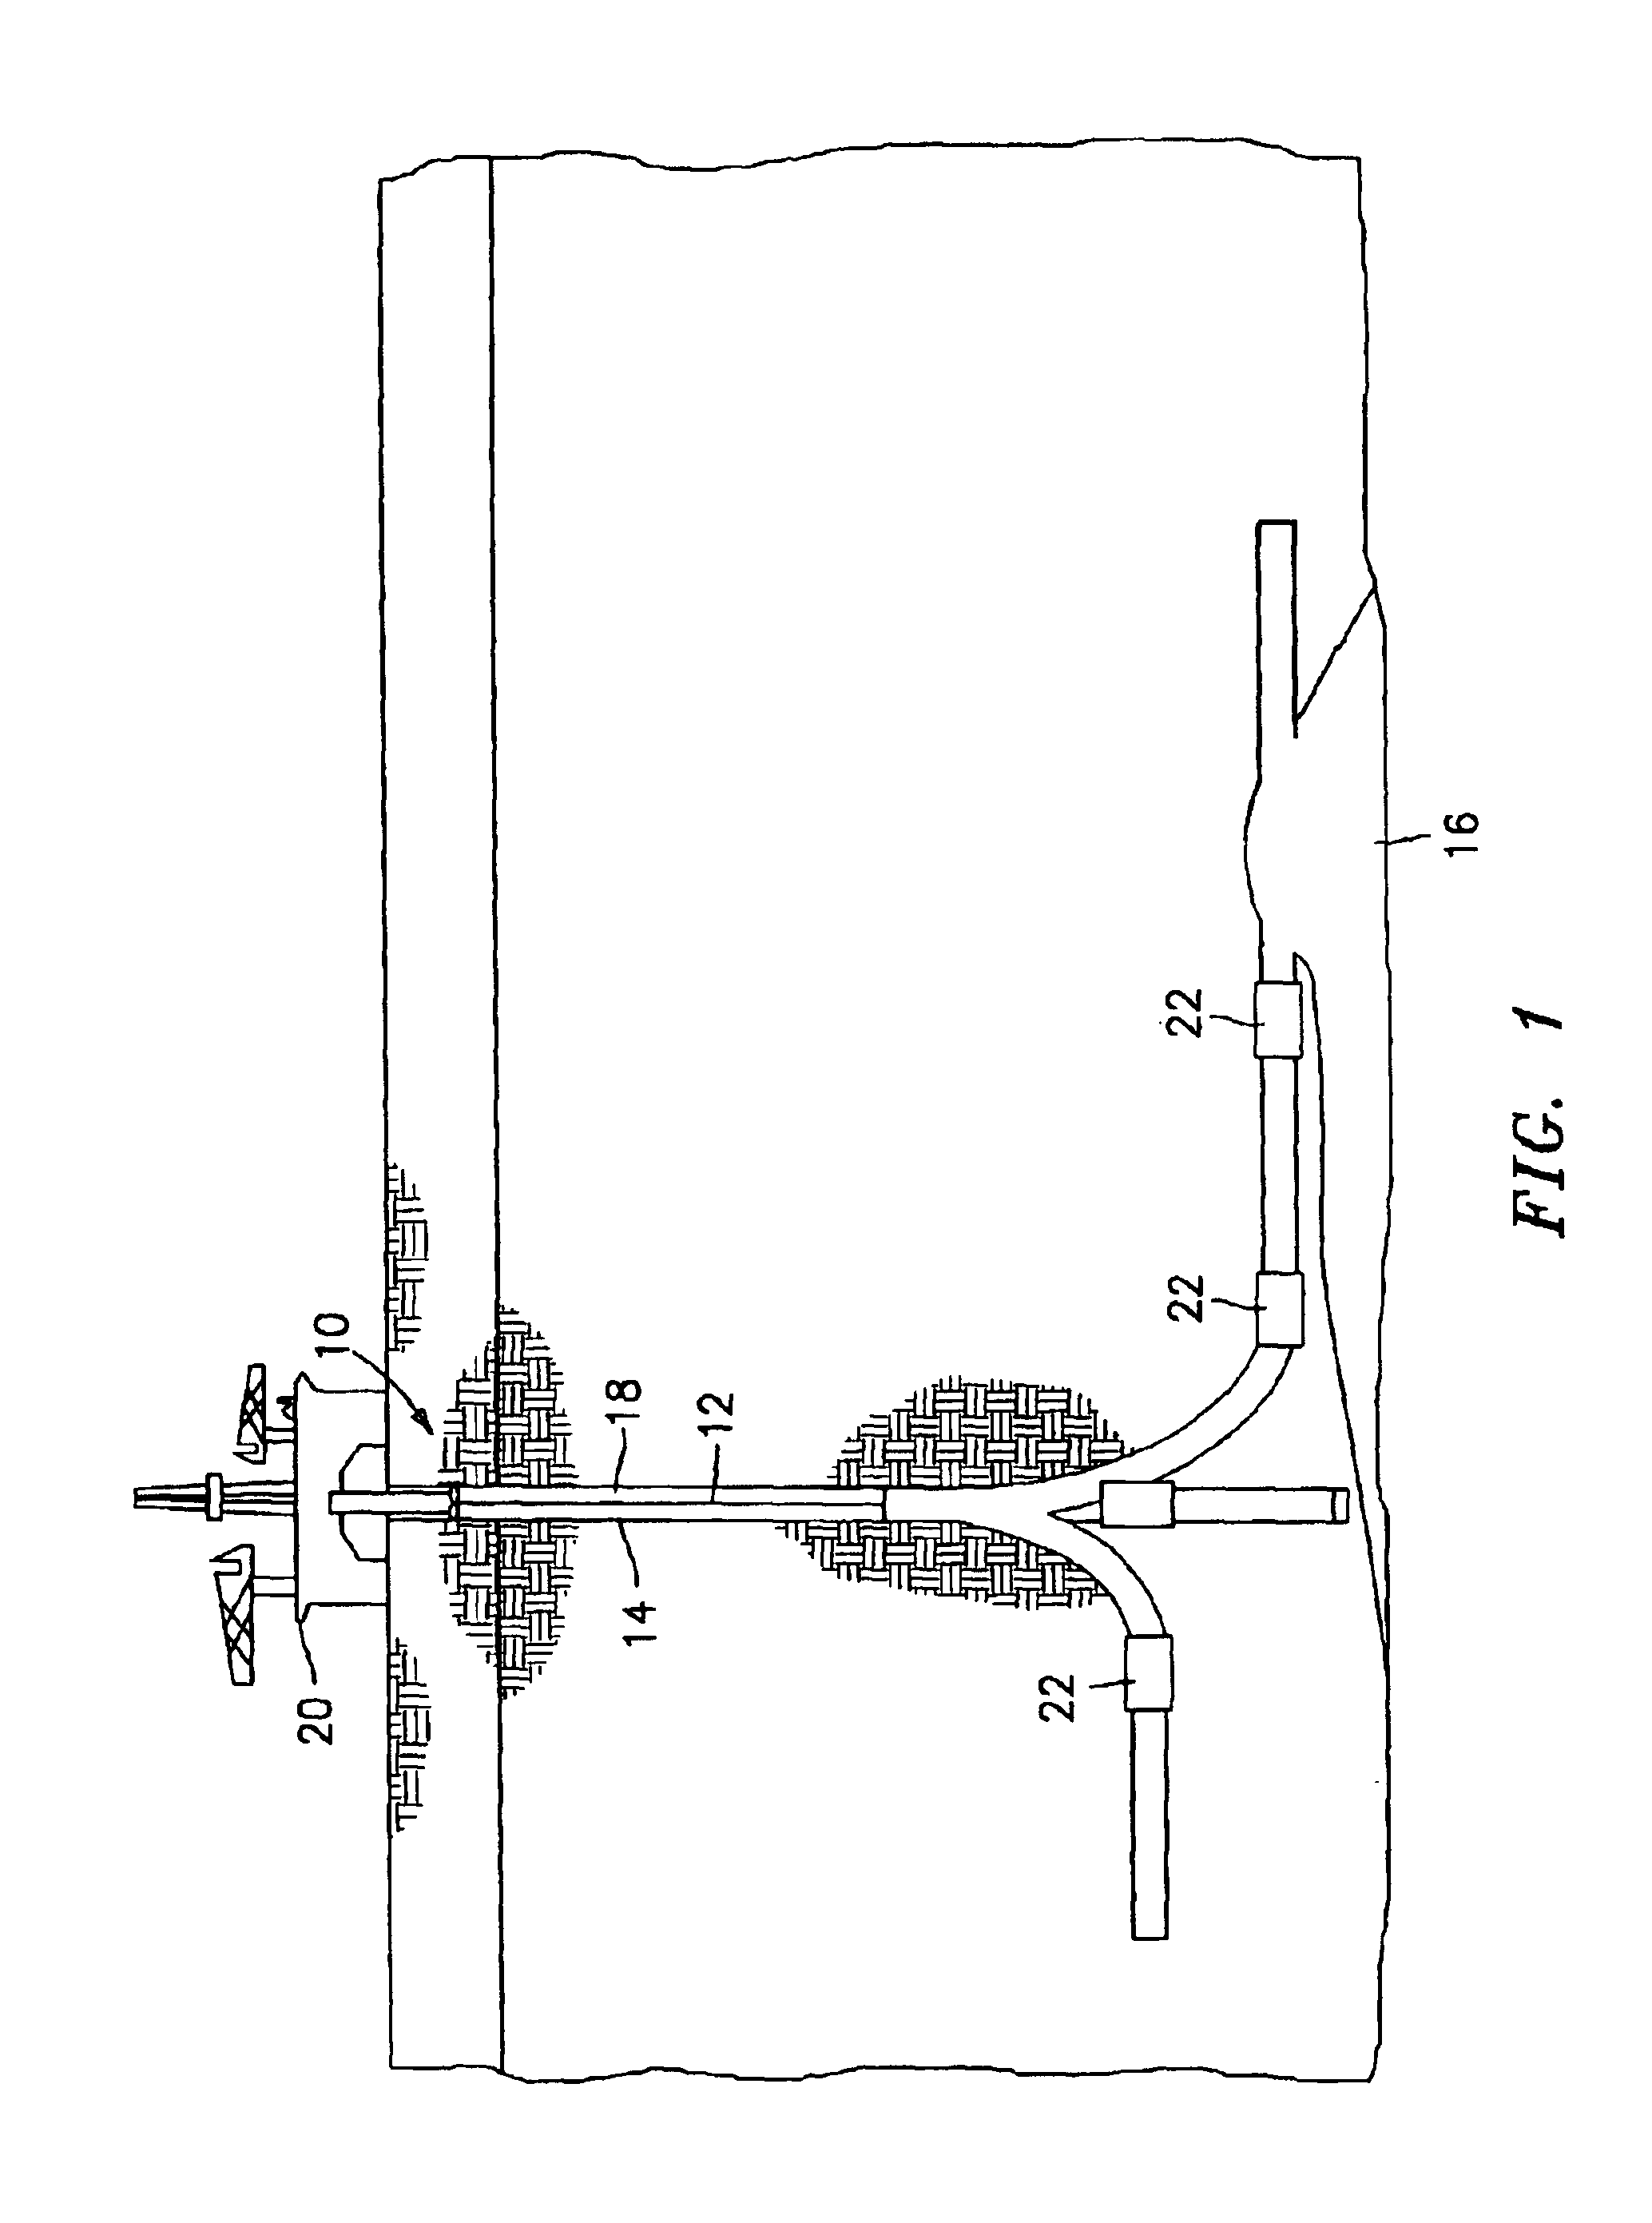 Apparatus for sensing fluid in a pipe